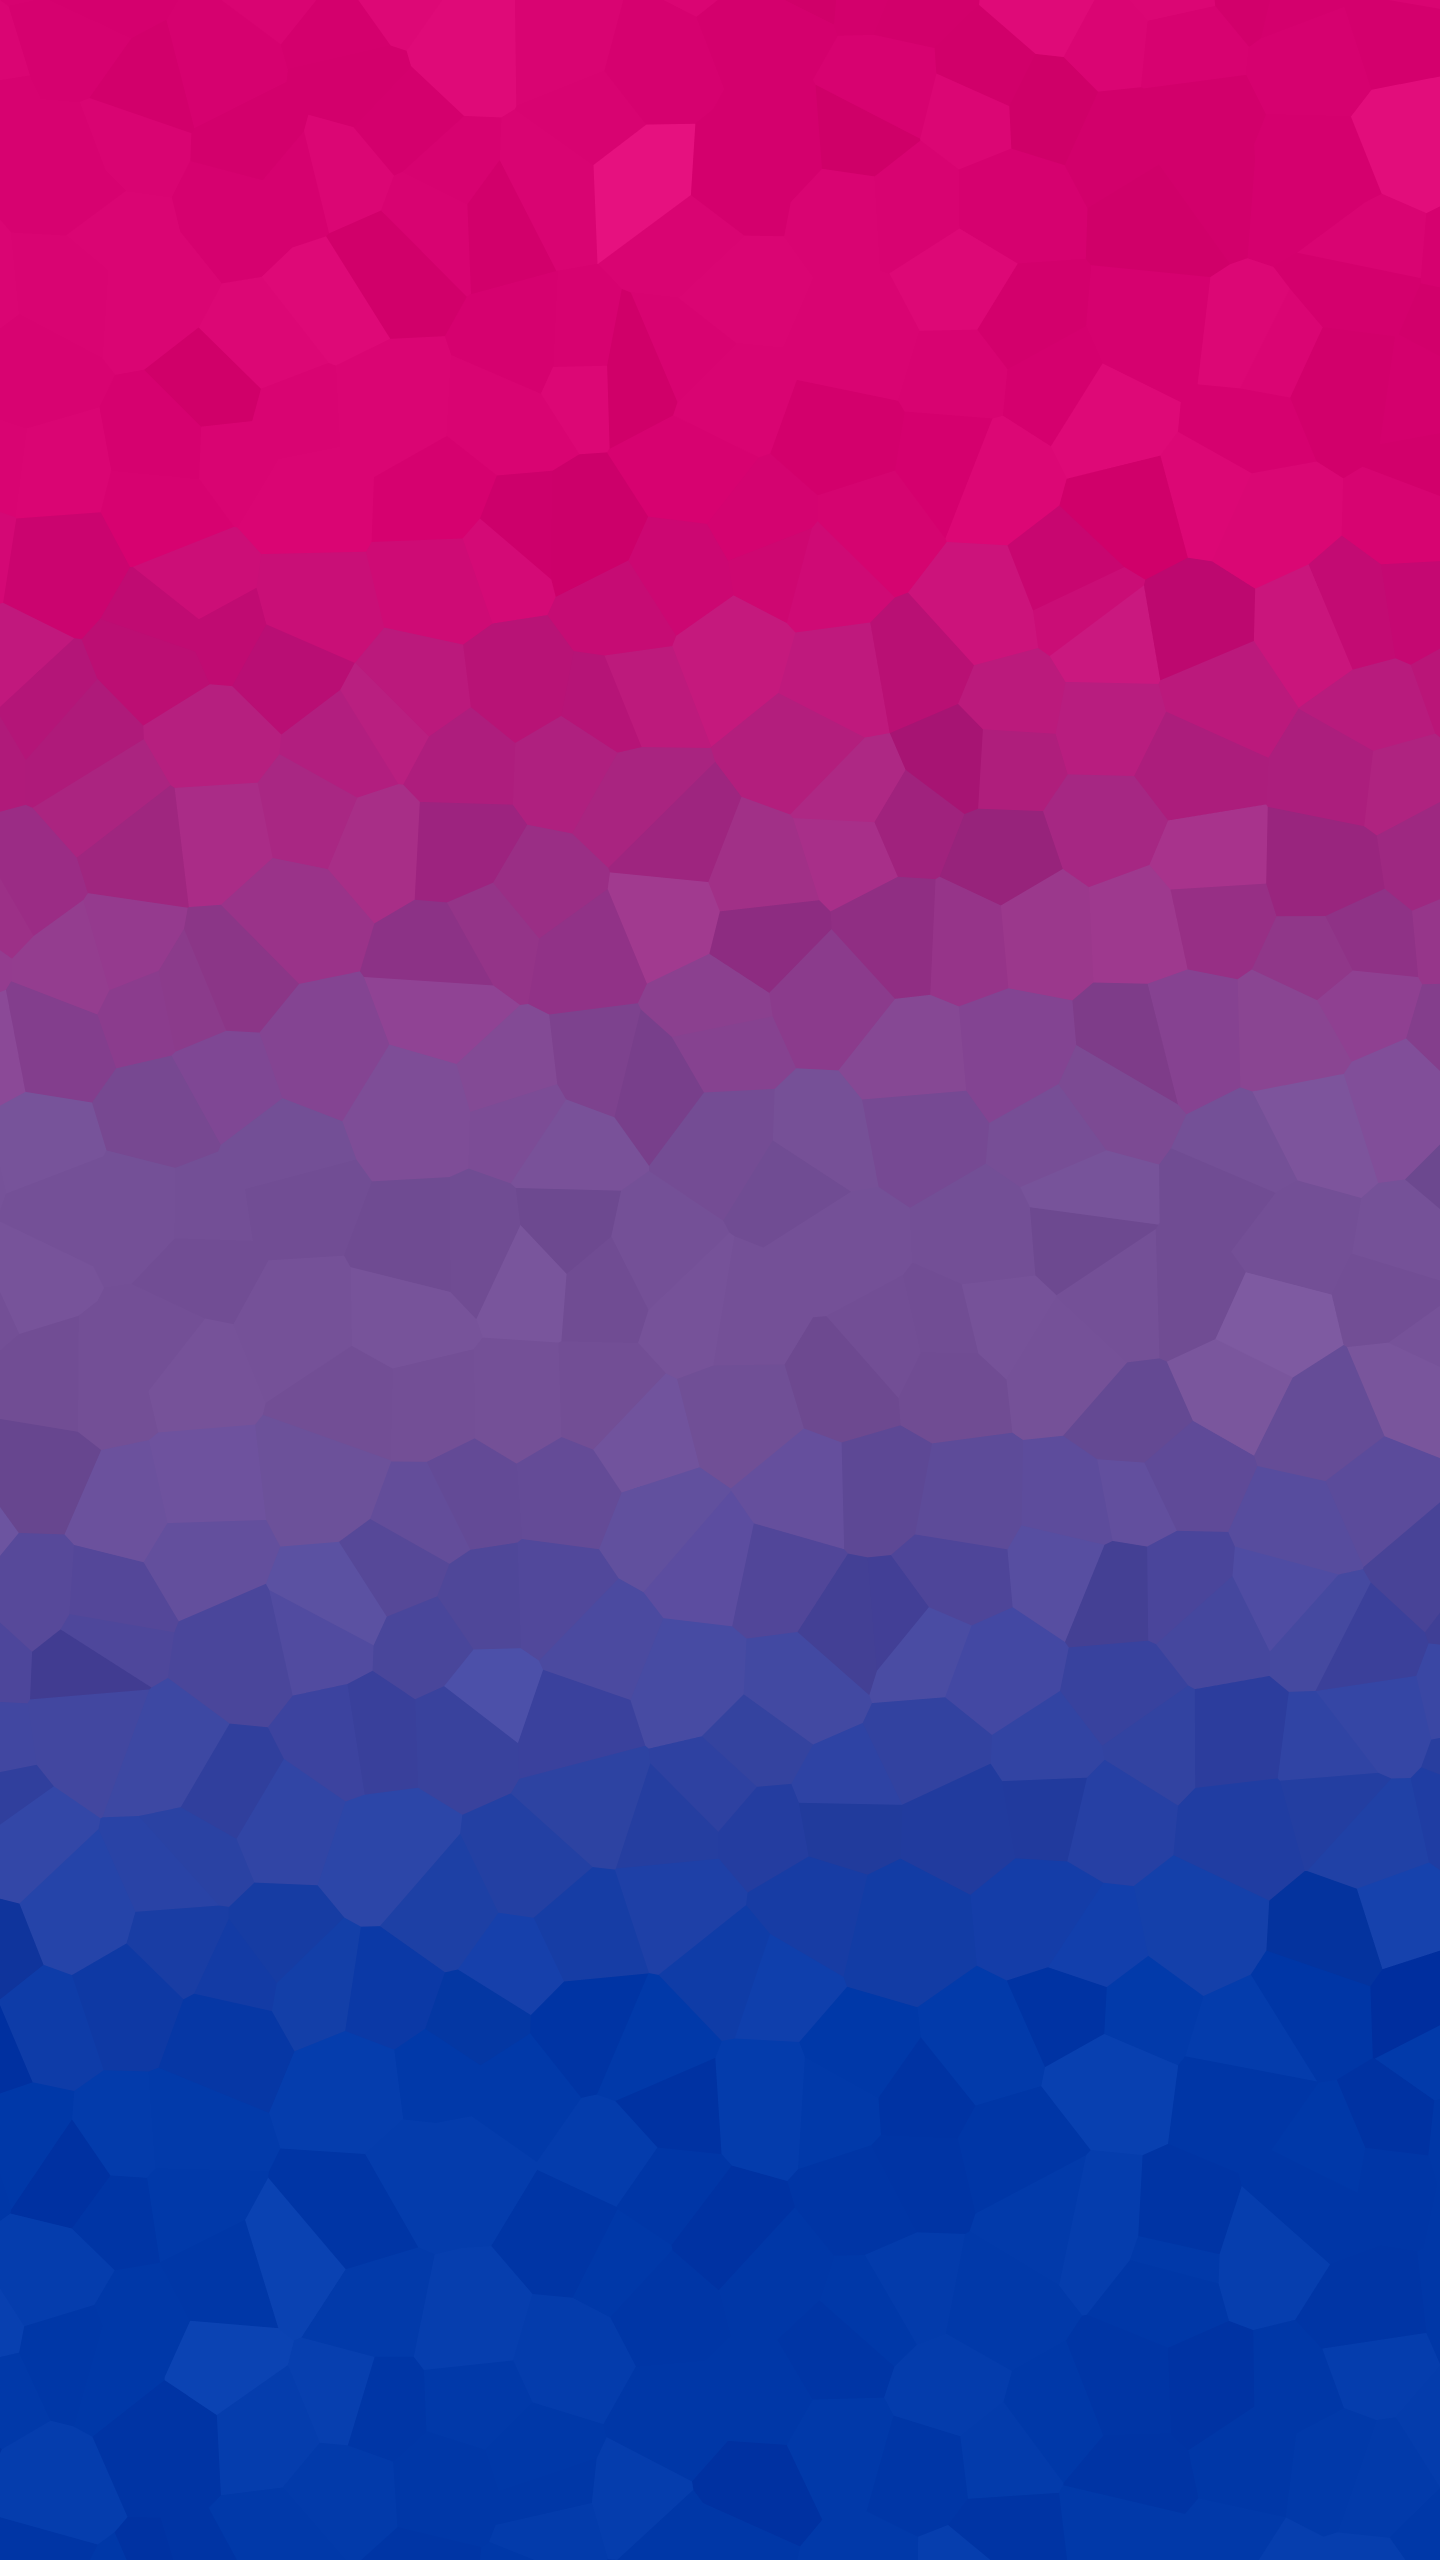 Free download Made a crystallized Bi Flag phone wallpaper bisexual